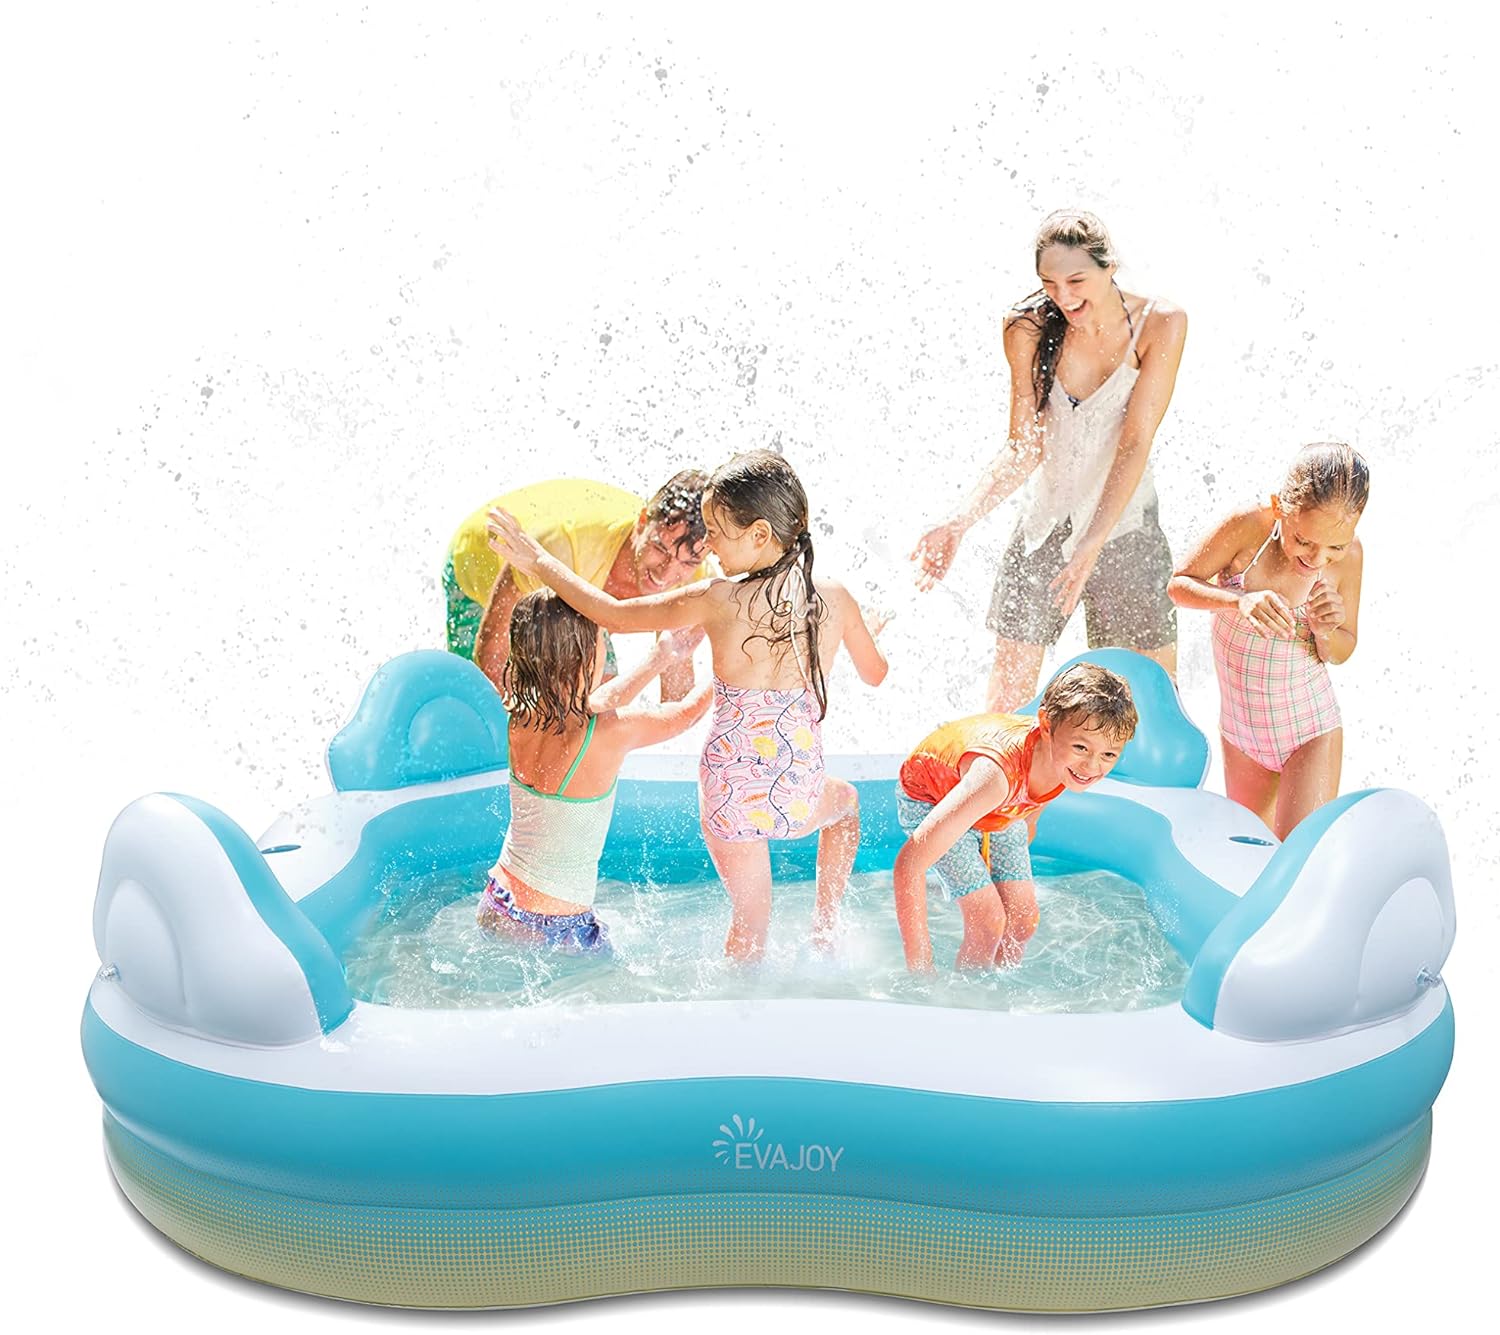 I bought this pool for my 3 year old and the 4 and 5 year old boys that I babysit to play in this summer. They love the pool and even my oldest 4 girls like to get in and play with the littles and relax. It is nice and roomy and the blow up seats are nice to have so they can all sit in their own corner and not crowd each other while they play. The bottom of the pool has a valve to easily empty the pool when it is time for a water change, which is also really nice. We did have to buy an air pump 